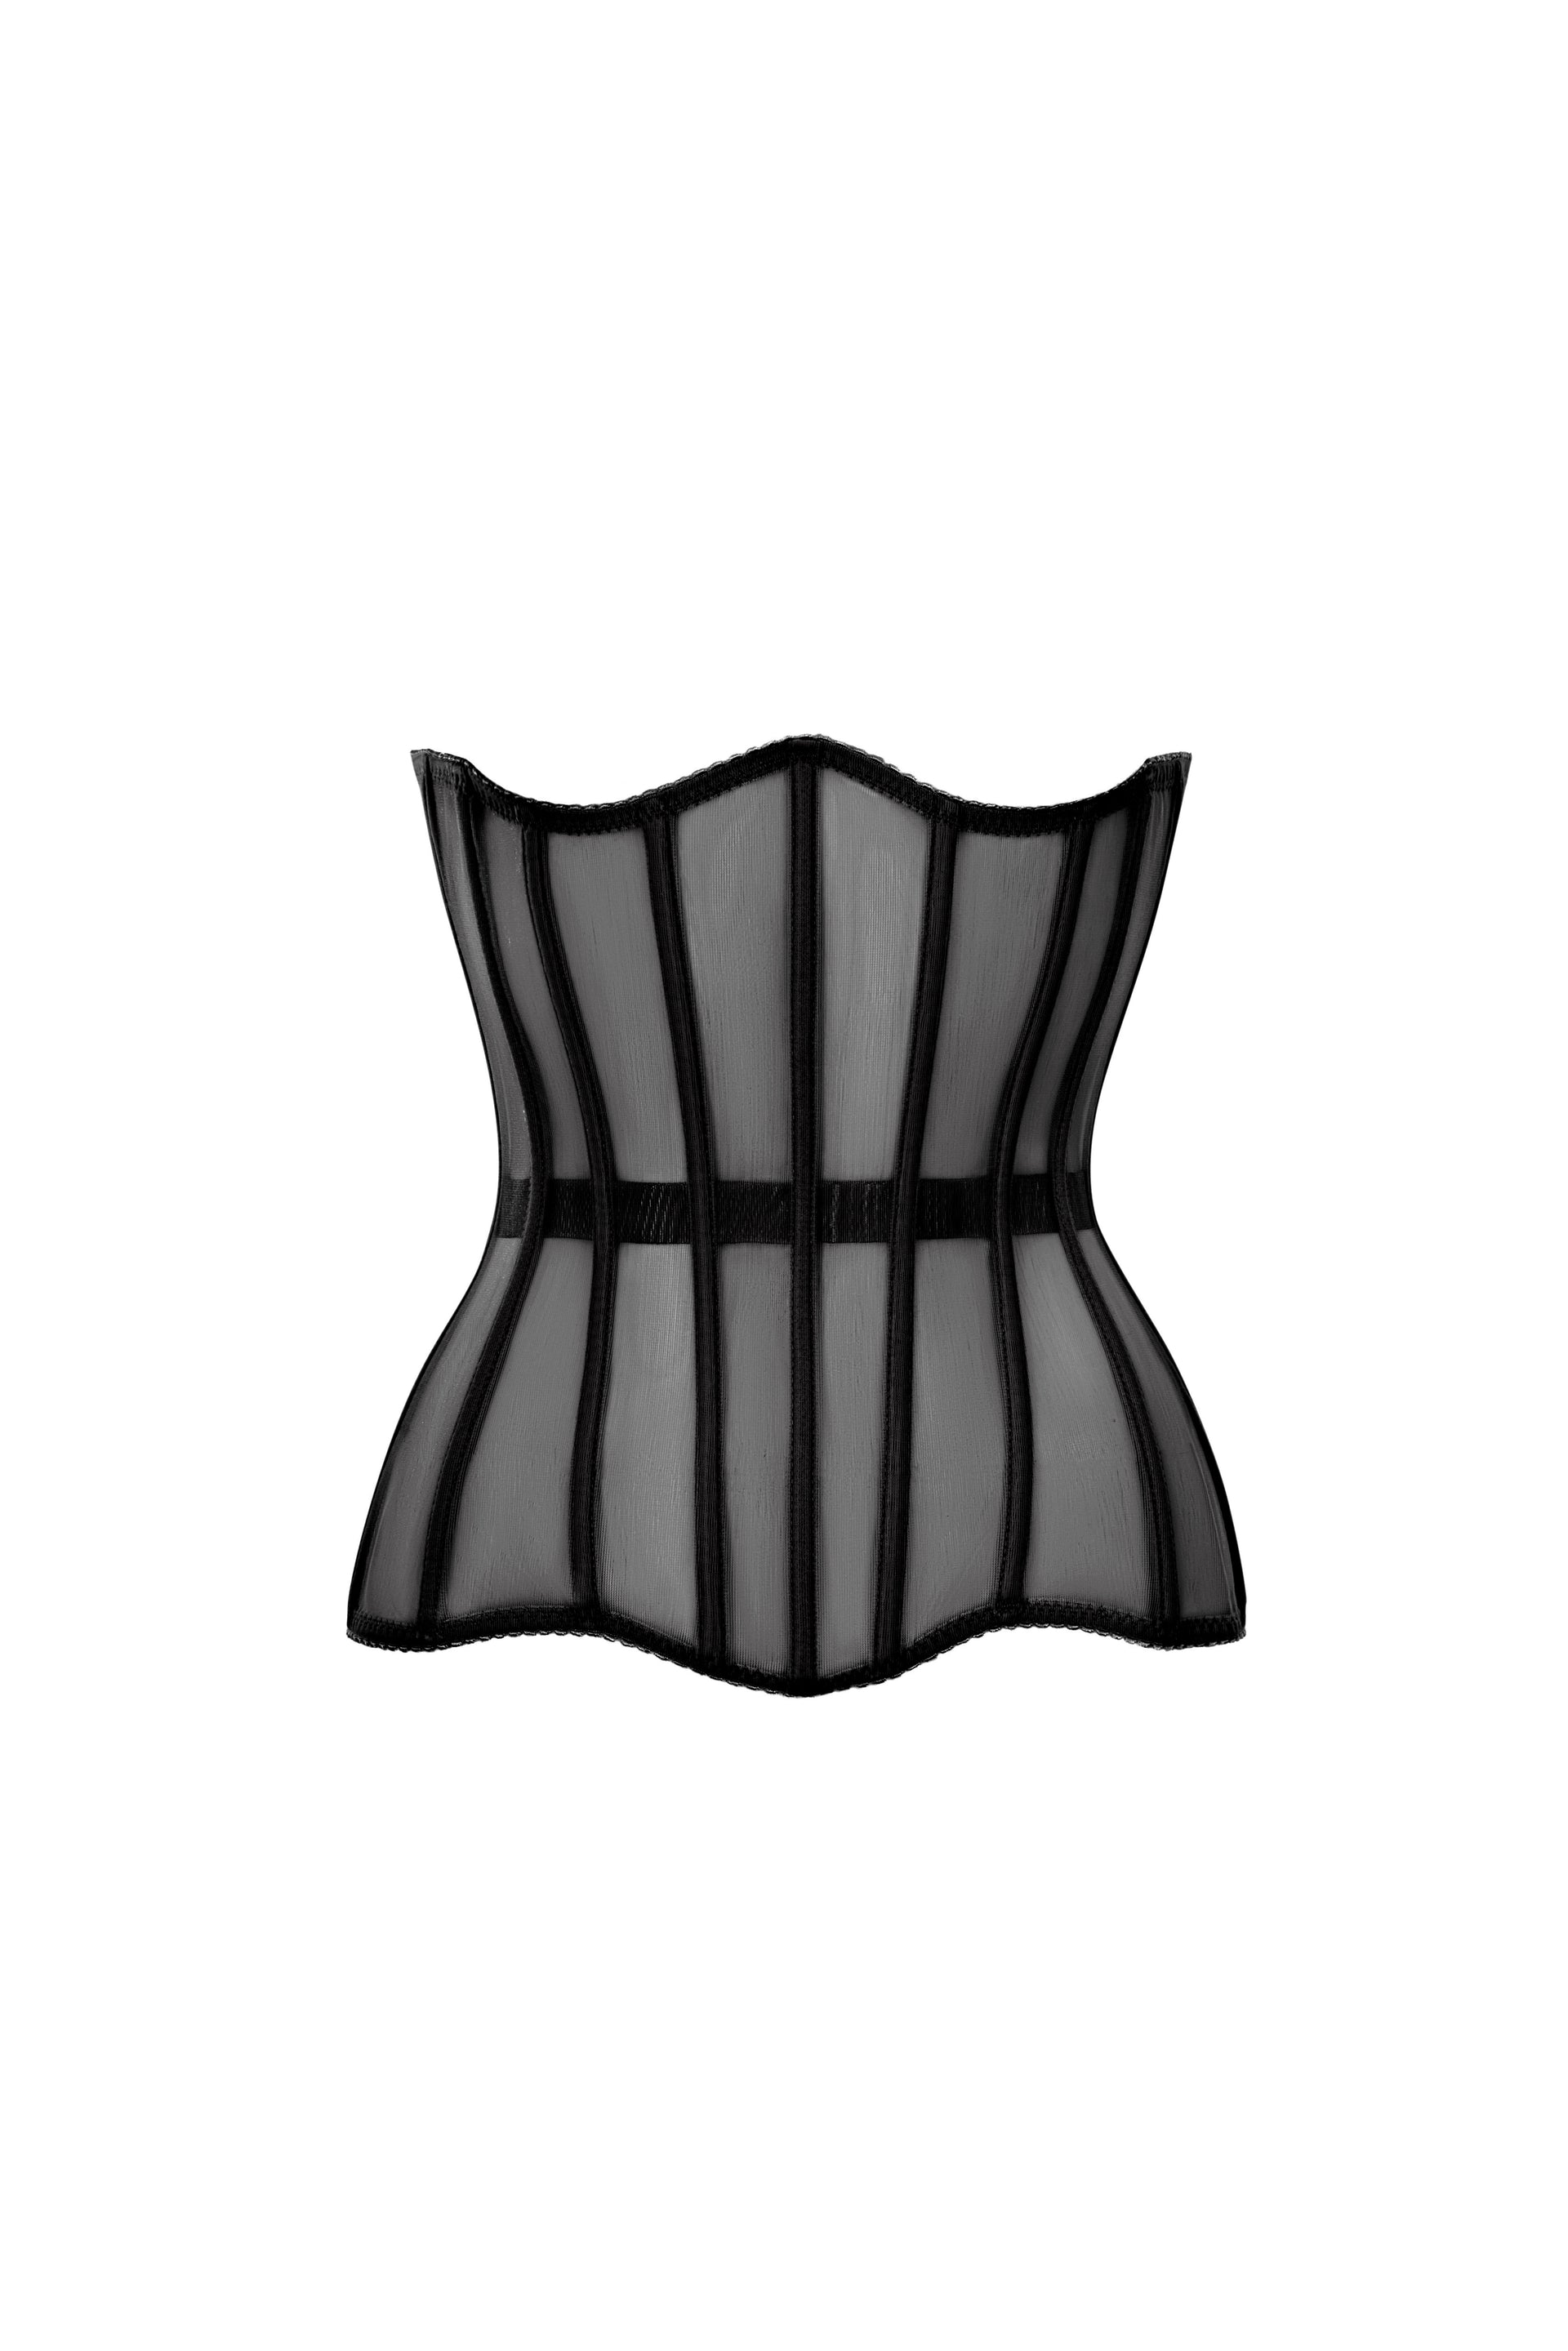 Black corset without cups